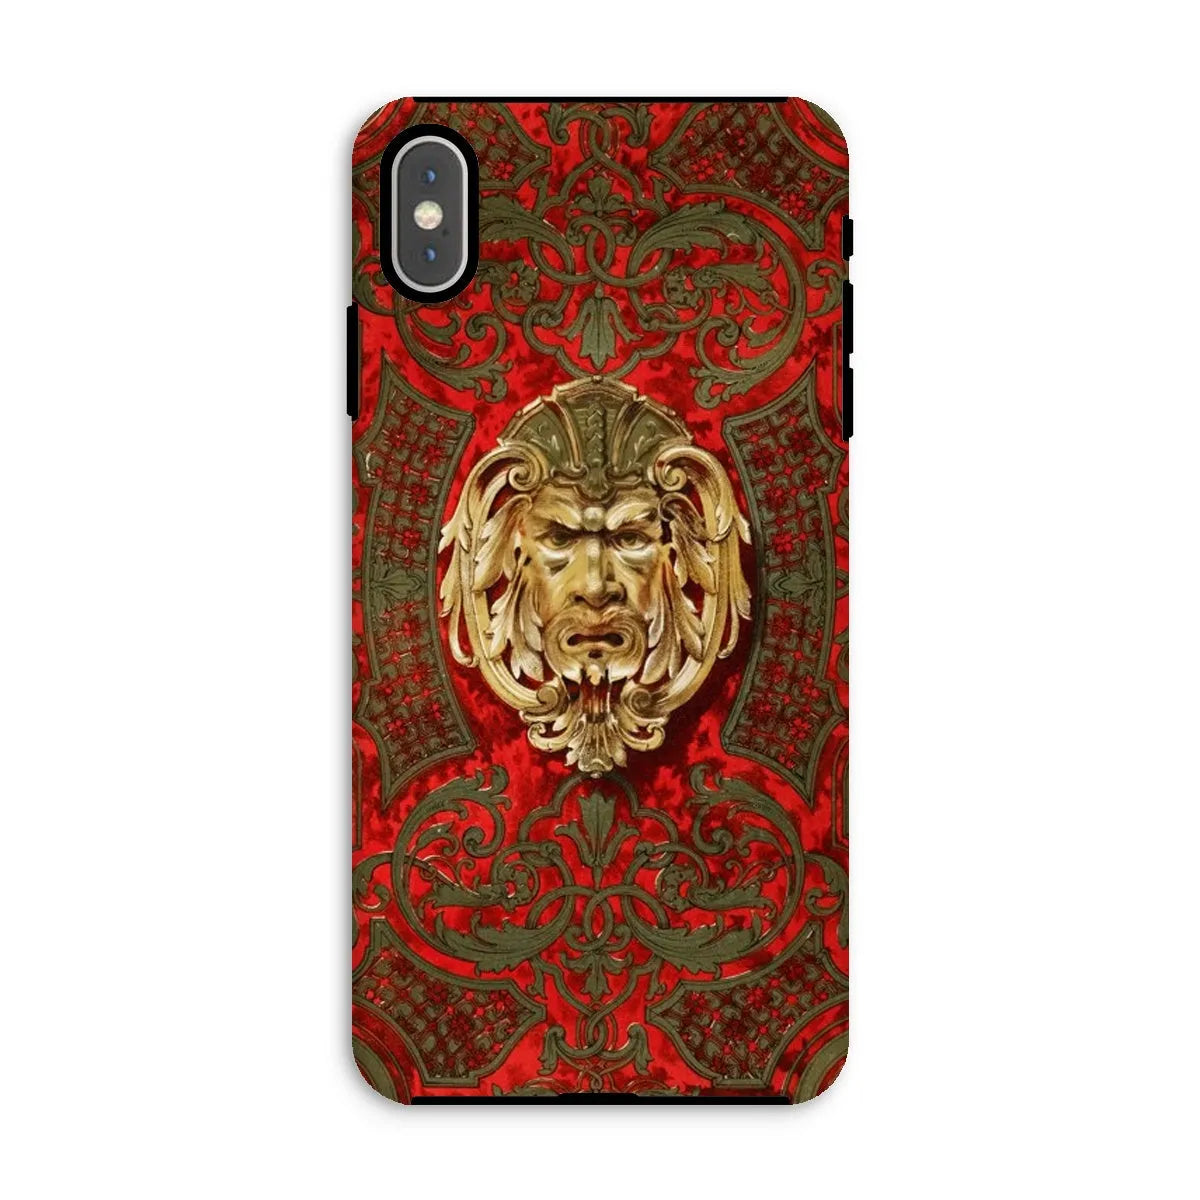 Panel In Buhl Victorian Art Phone Case - Matthew Digby Wyatt - Iphone Xs Max / Matte - Mobile Phone Cases - Aesthetic